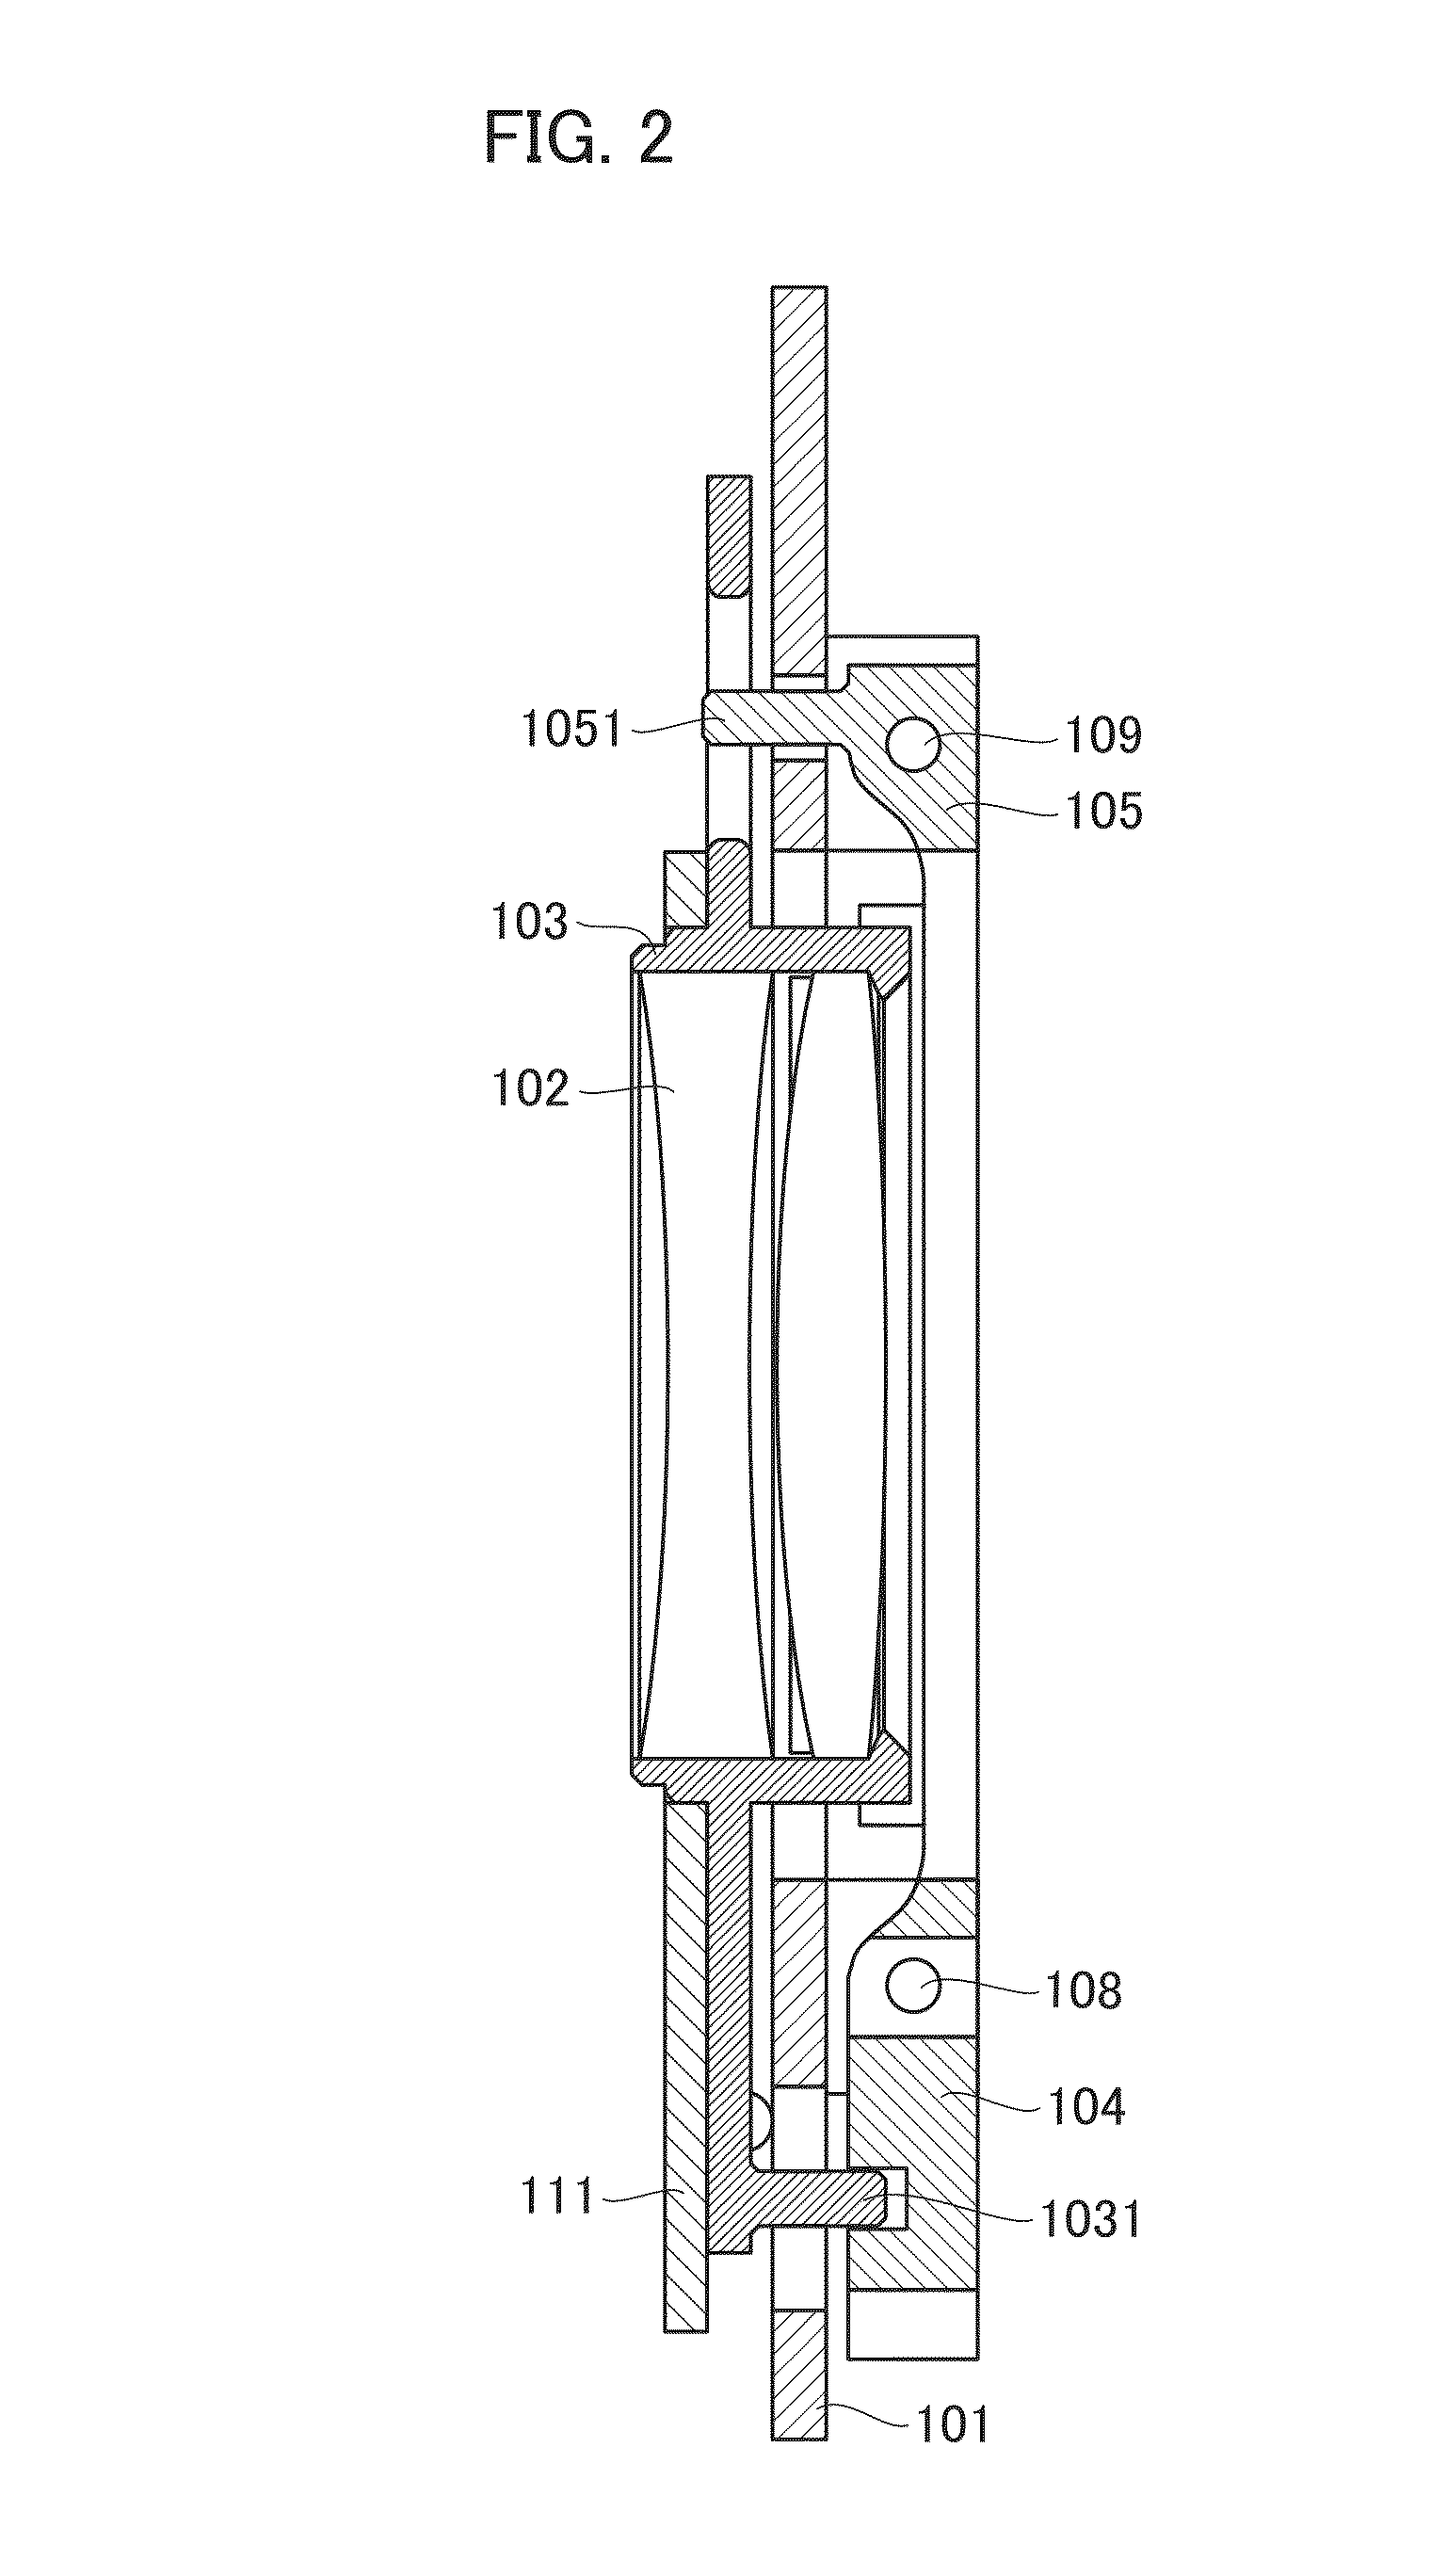 Image shake correction apparatus, and optical equipment and imaging device provided with same